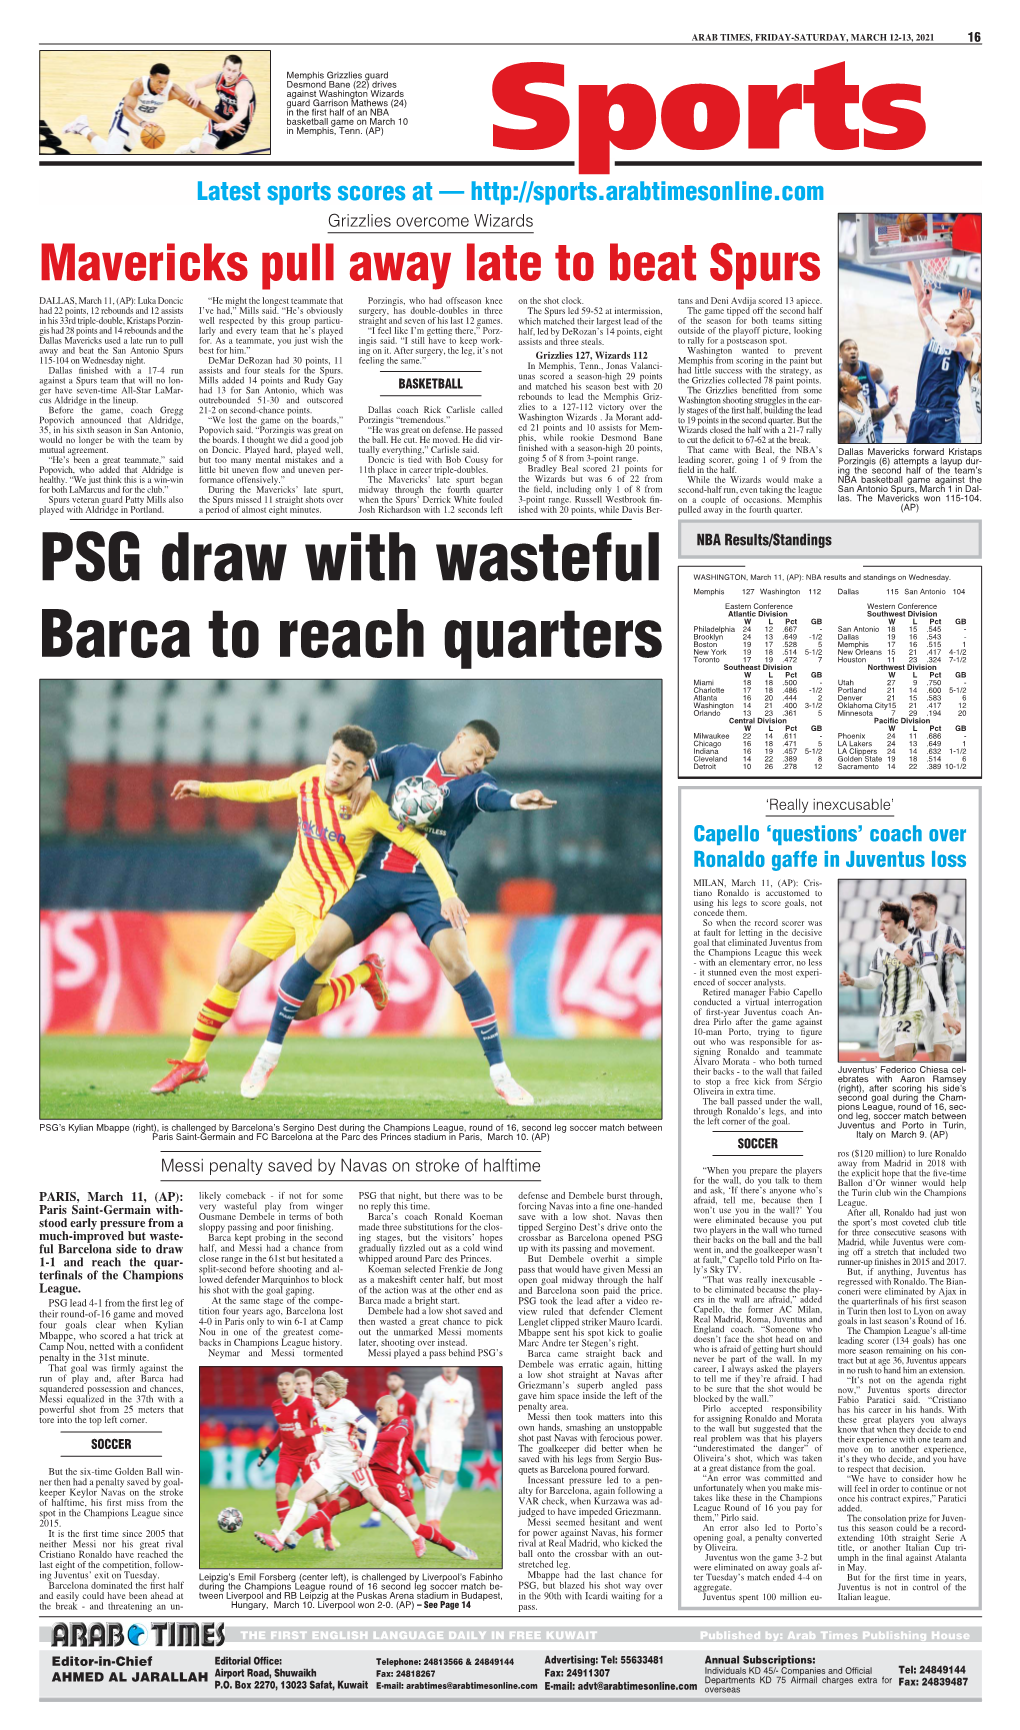 PSG Draw with Wasteful Barca to Reach Quarters